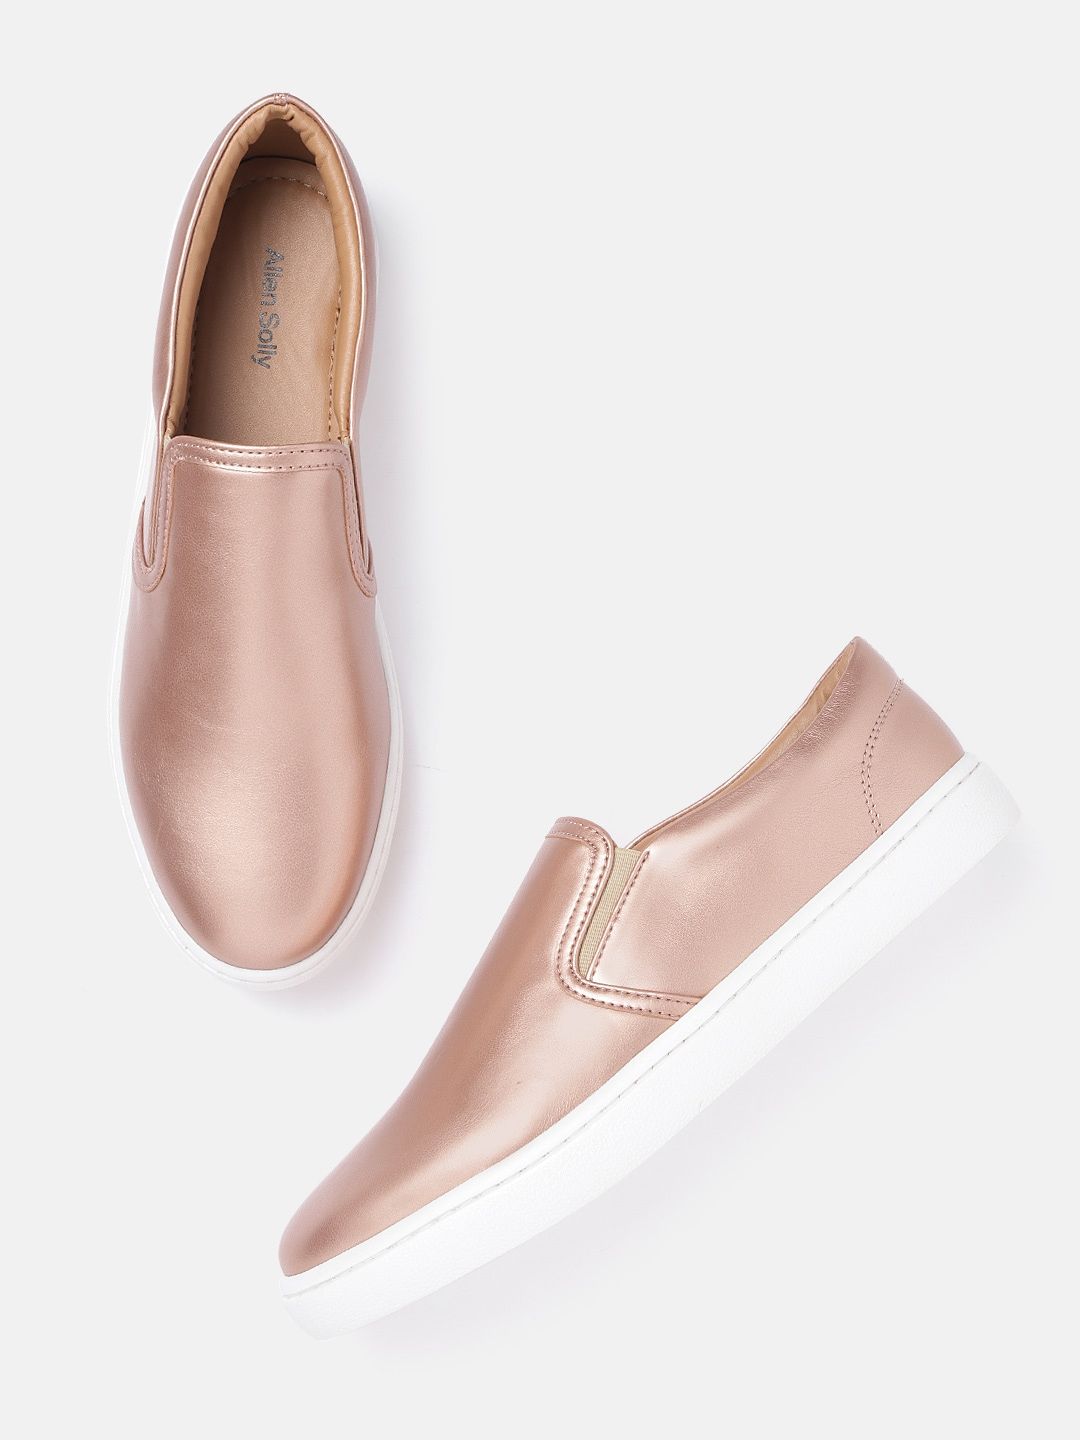 Allen Solly Women Rose Gold-Toned Slip-On Sneakers Price in India